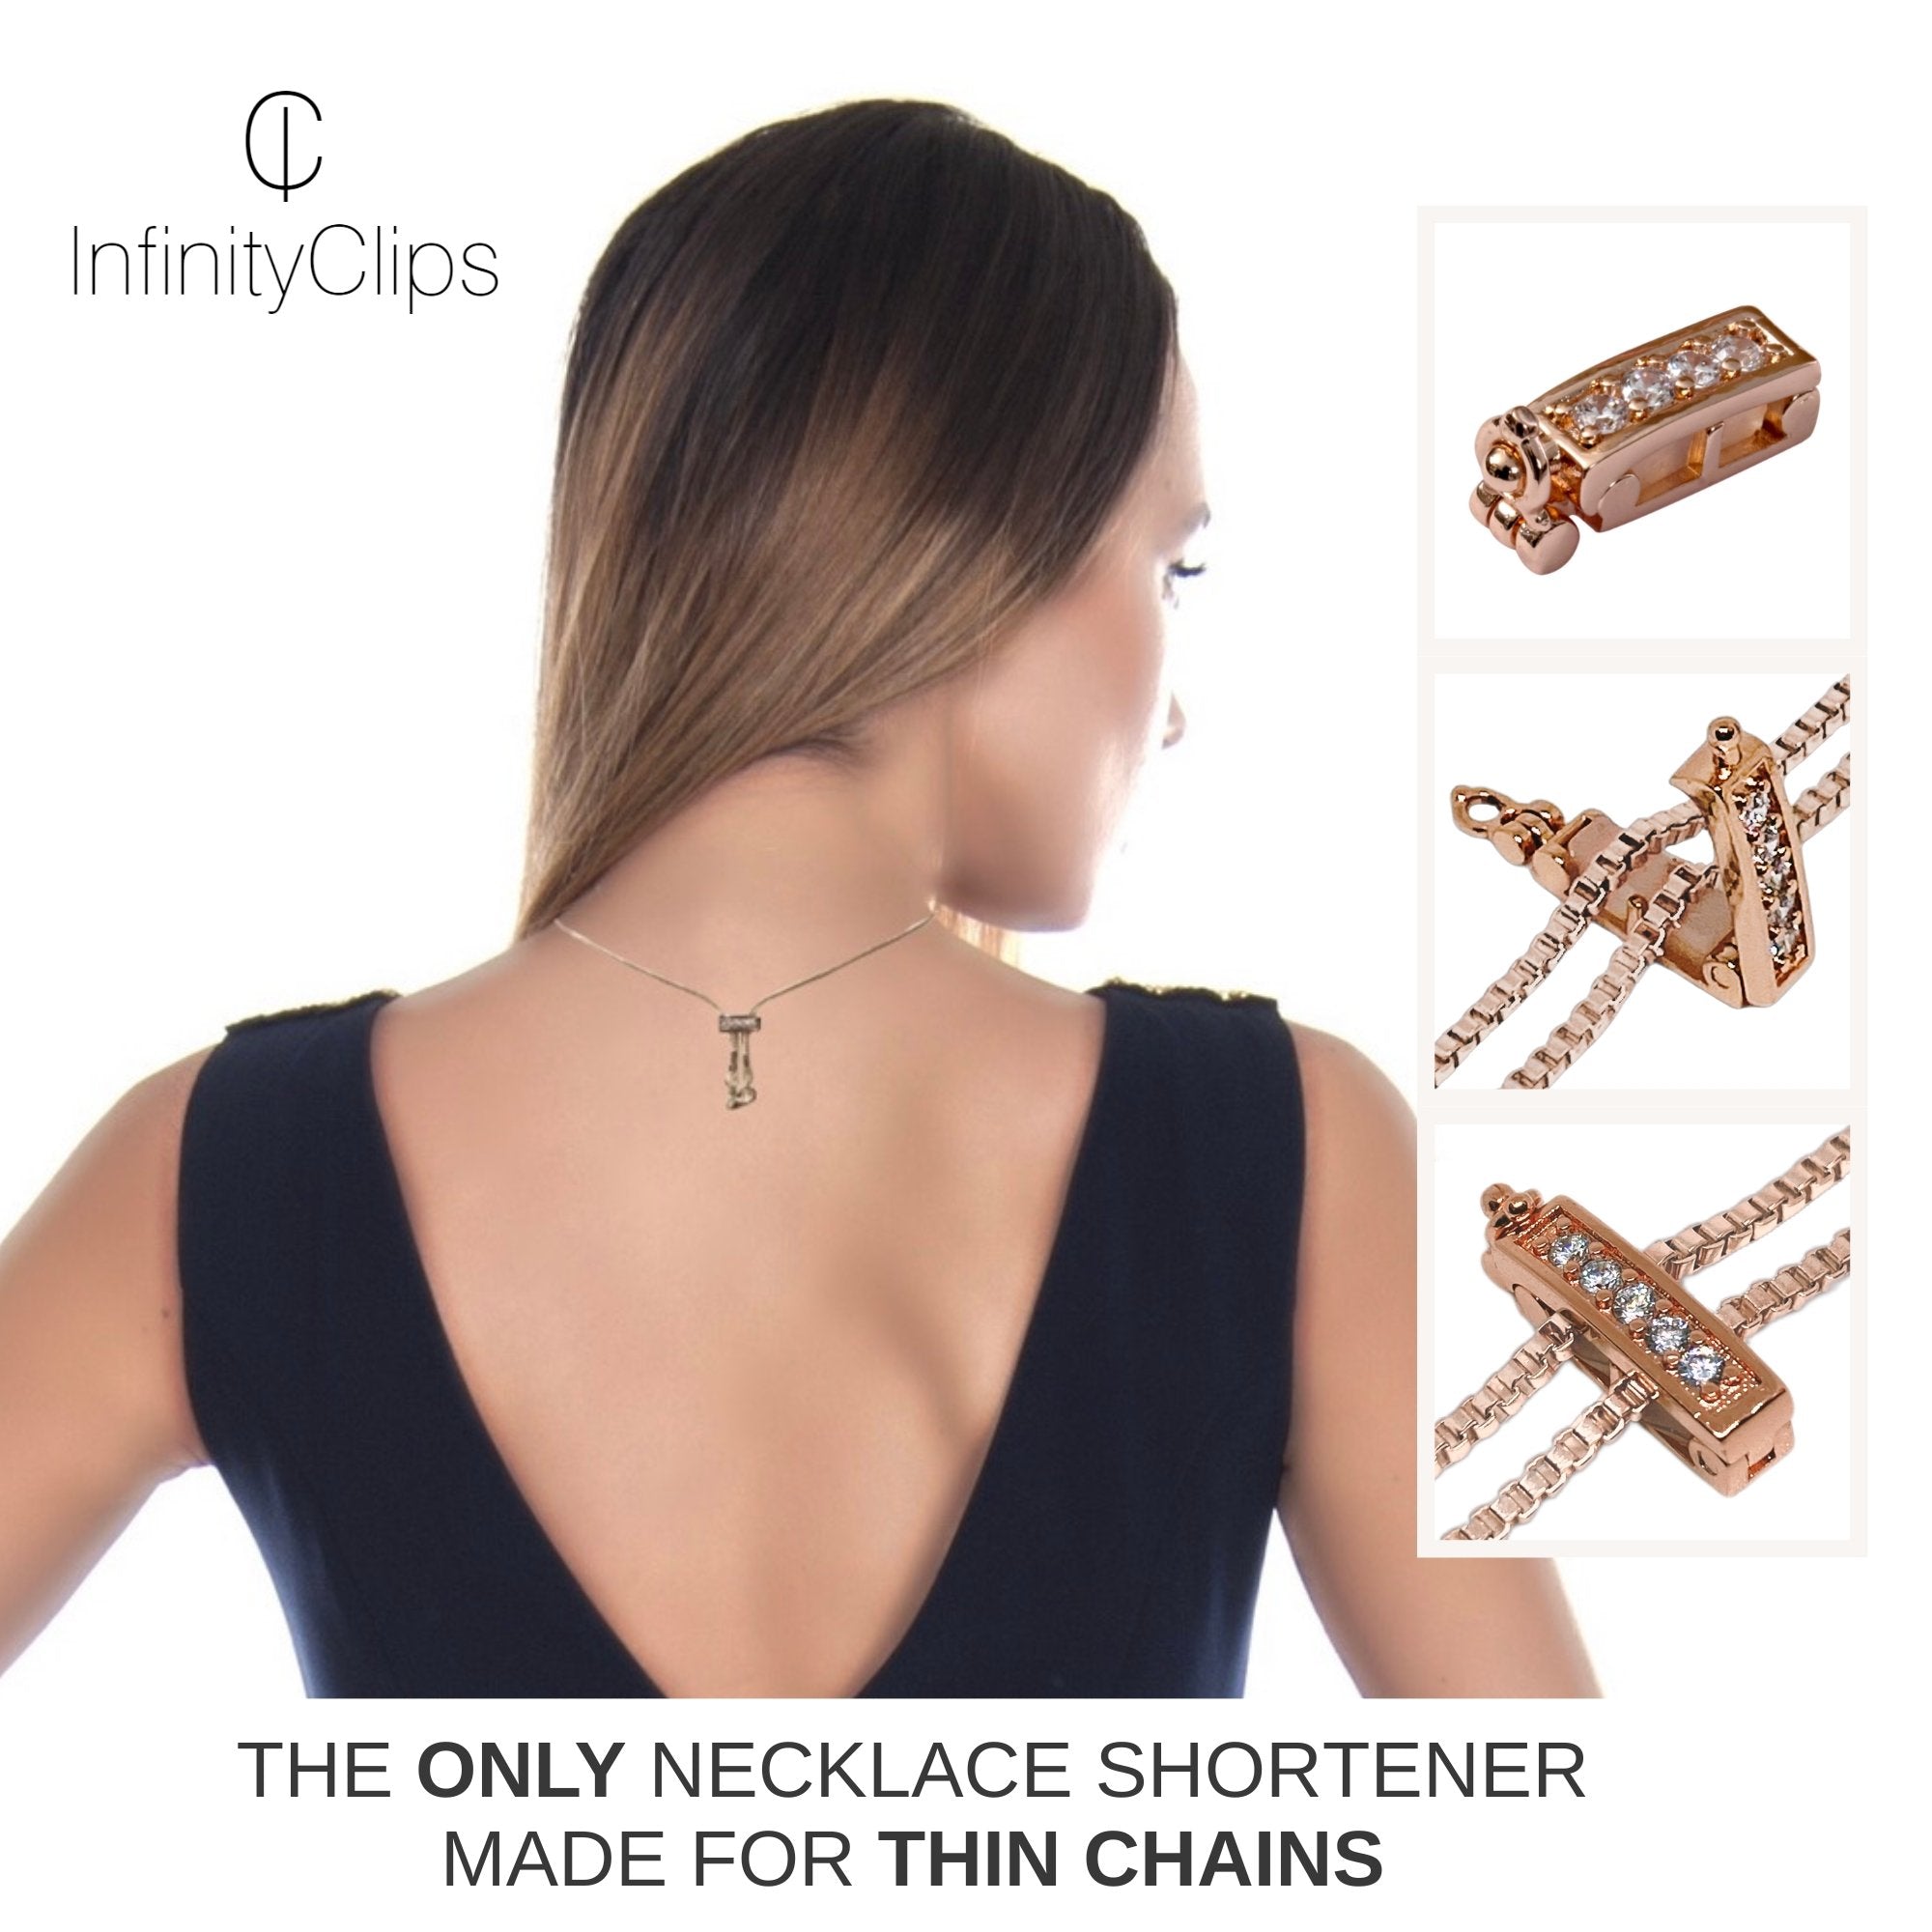 Infinity Clips Small Classic Rose Gold Necklace Shortener With